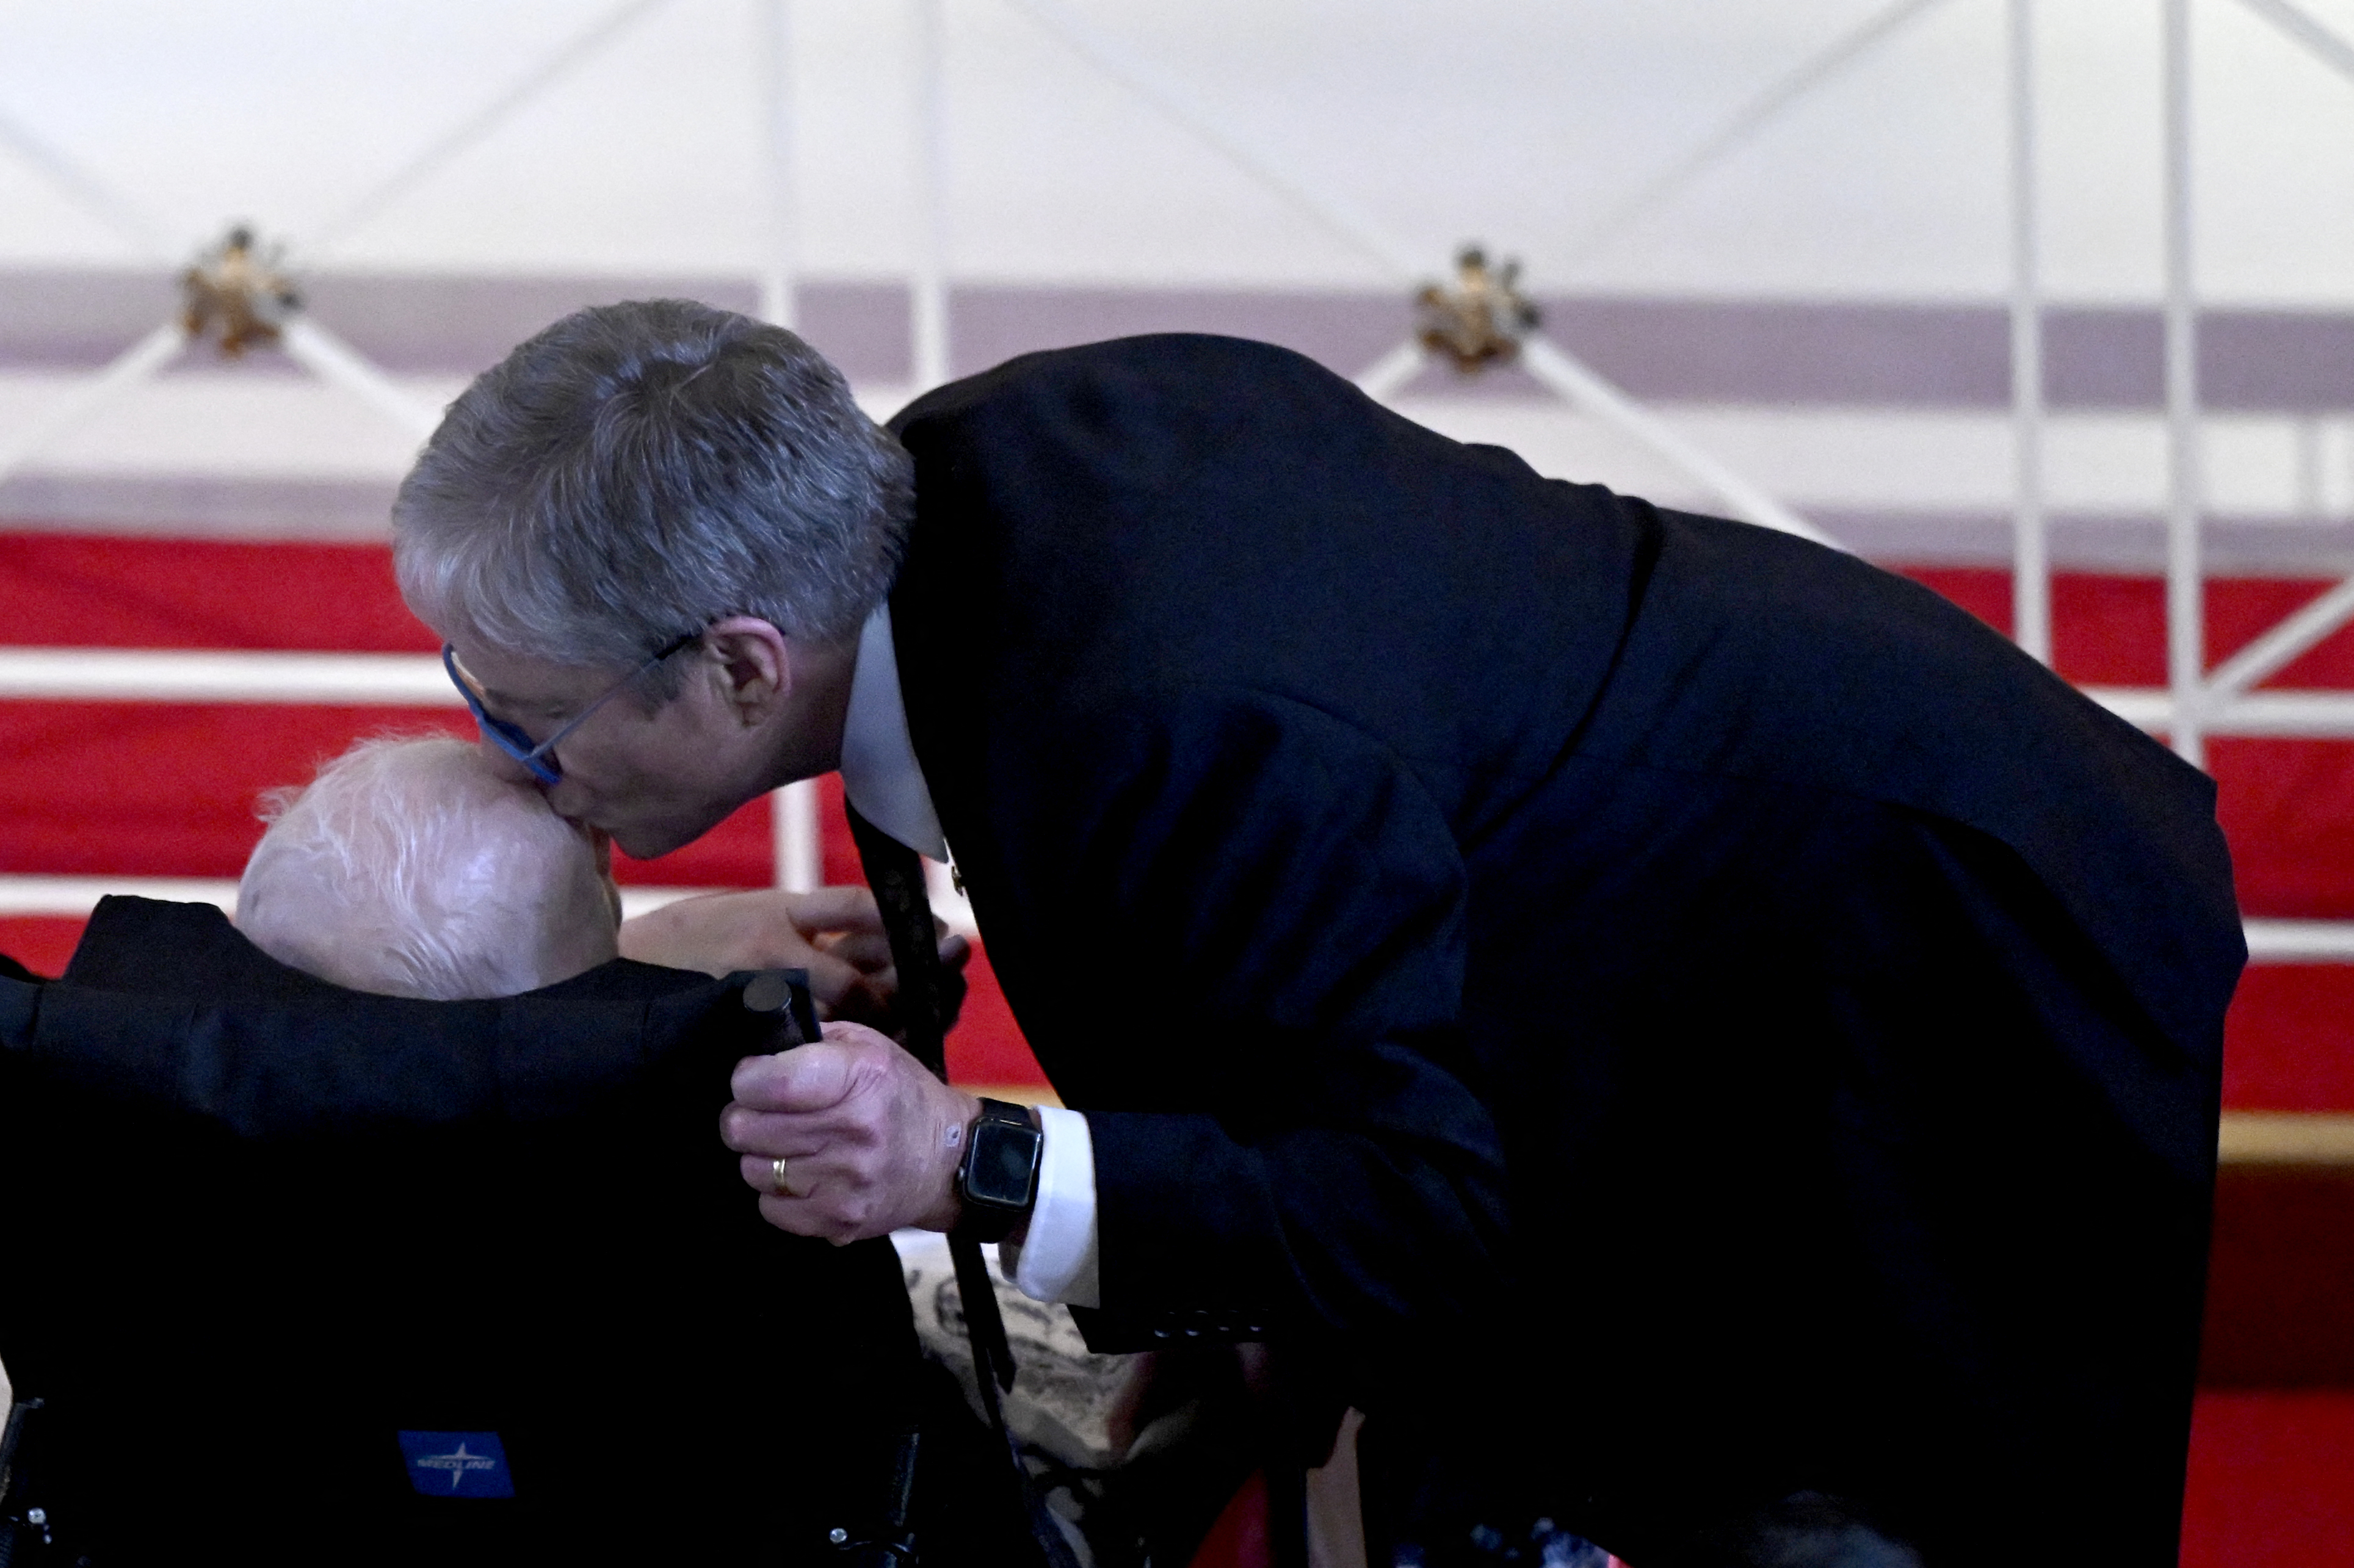 James "Chip" Carter kisses the head of his father, Jimmy Carter, during a tribute service for Rosalynn Carter, at Glenn Memorial Church in Atlanta, Georgia, on November 28, 2023. | Source: Getty Images